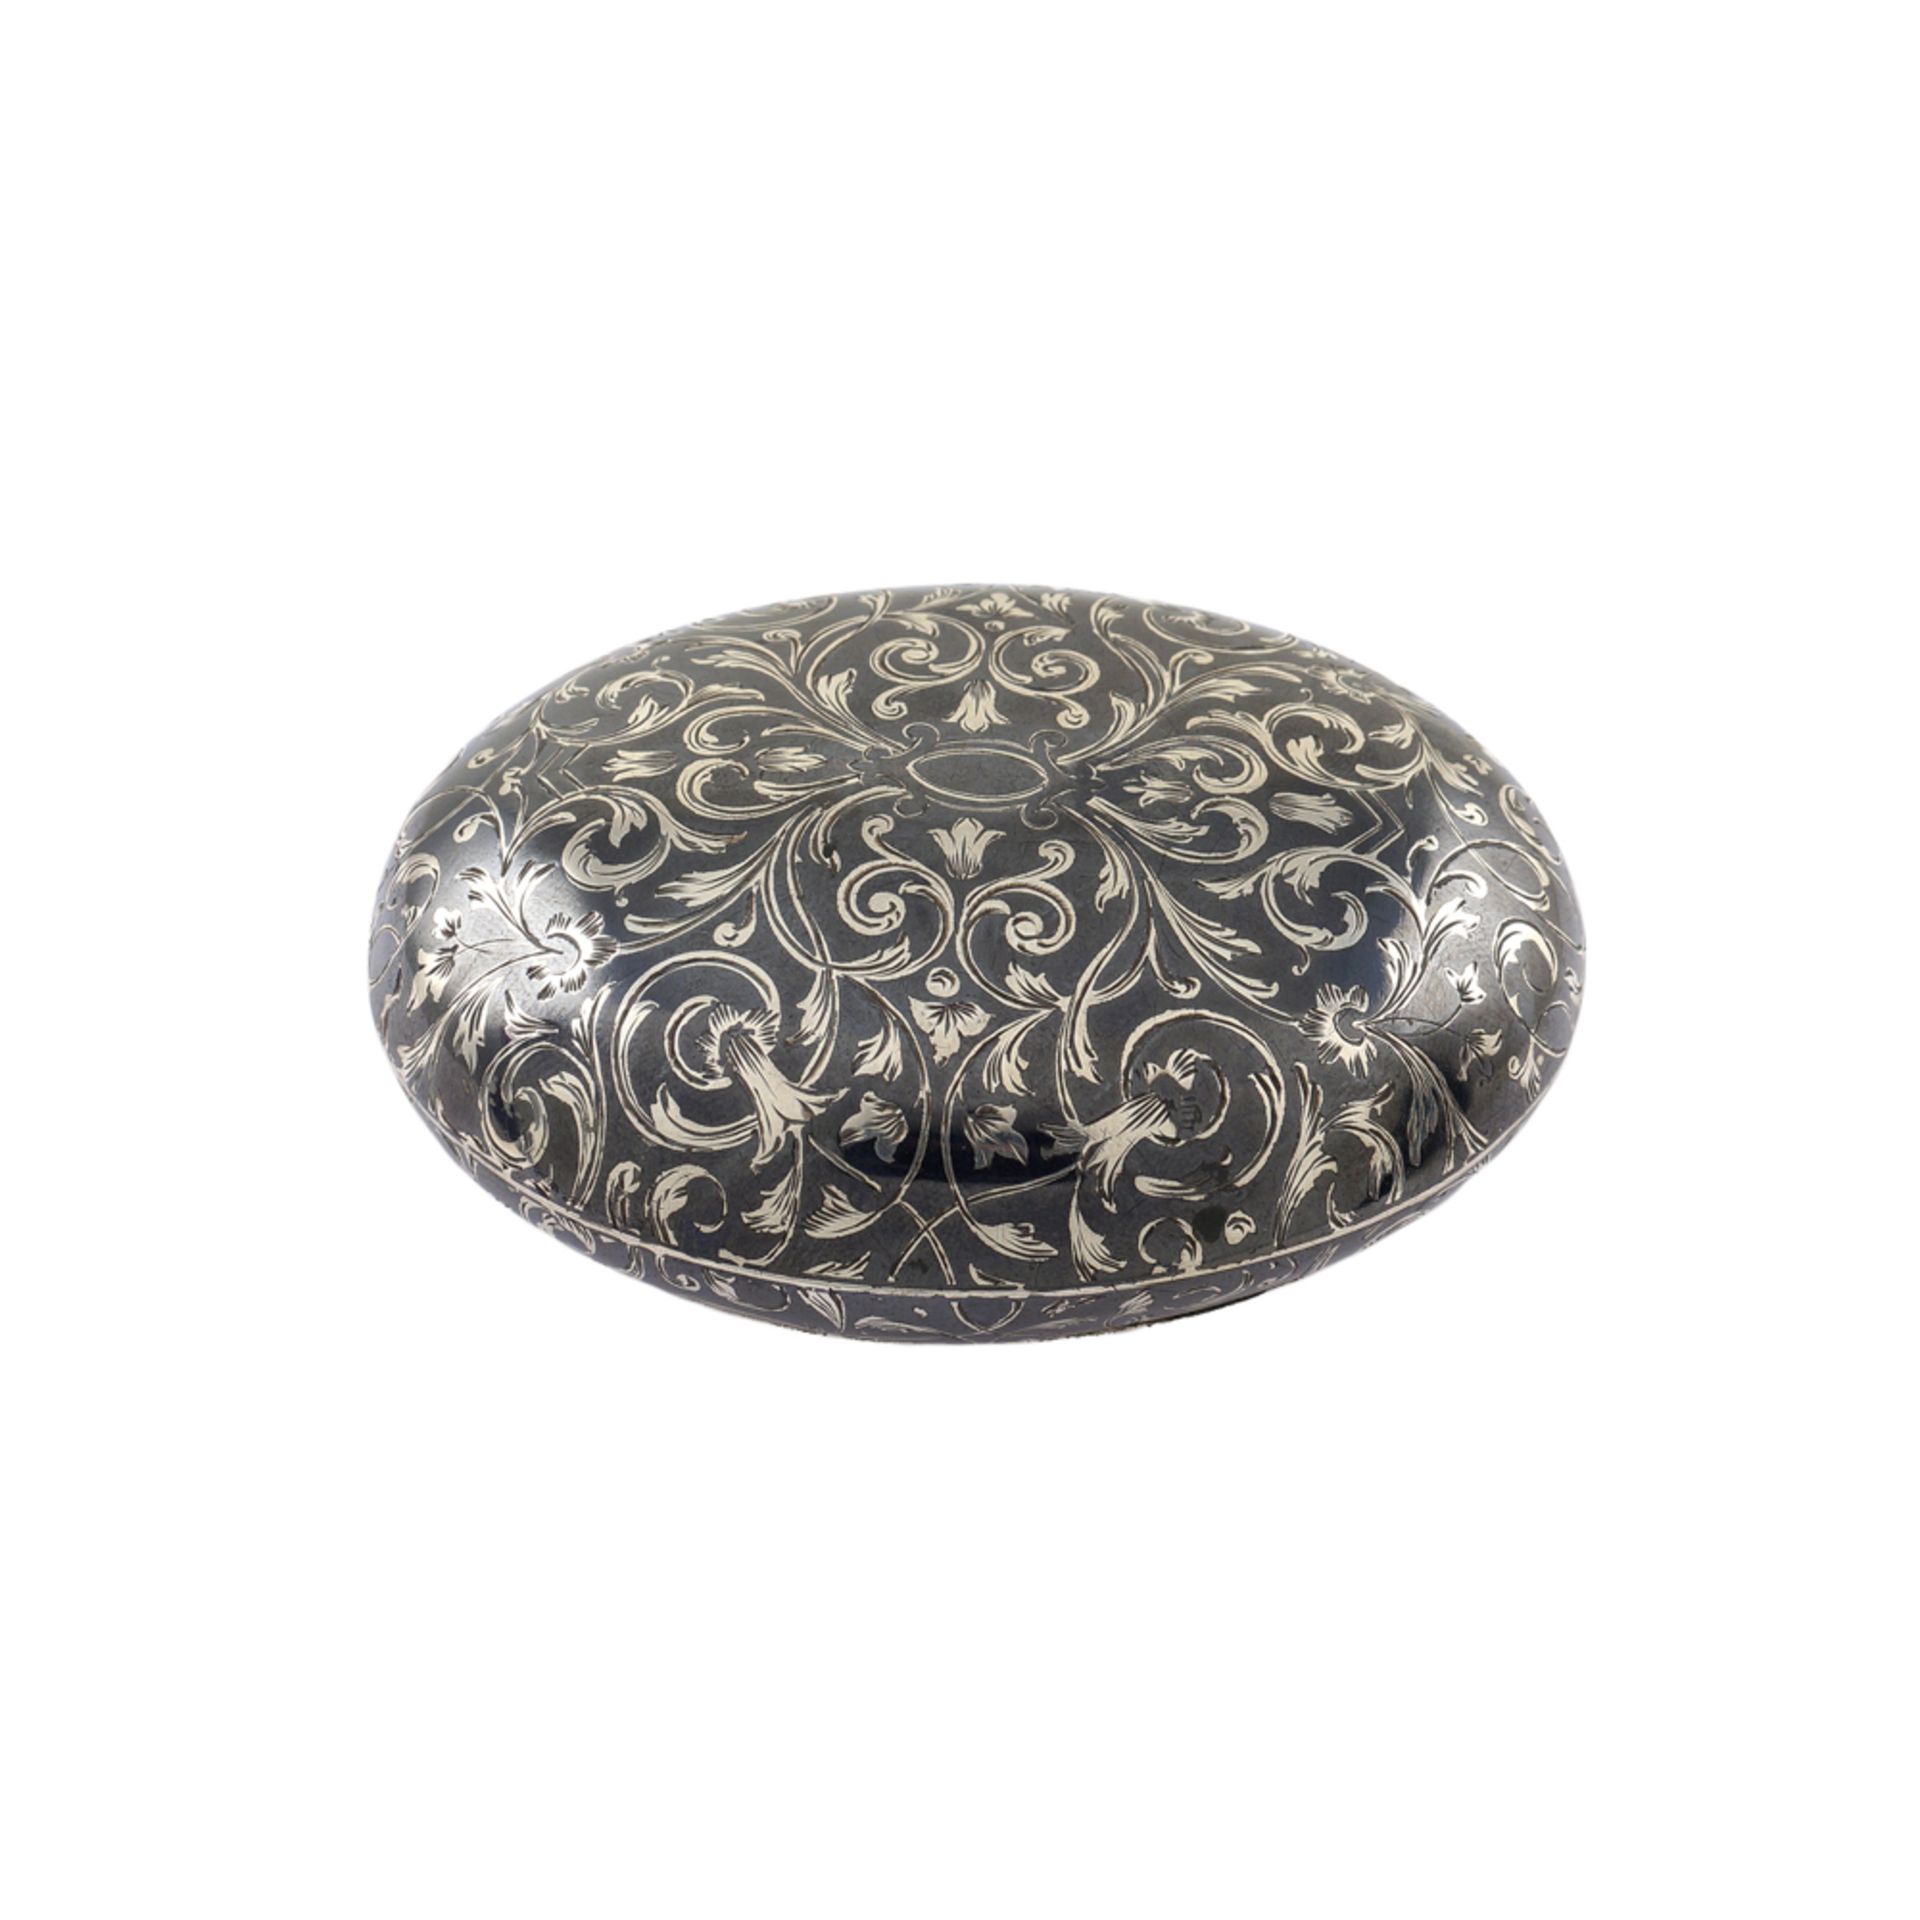 A silver niello snuffbox France, 19th century weight 70 gr. body engraved with volute plant - Image 2 of 2